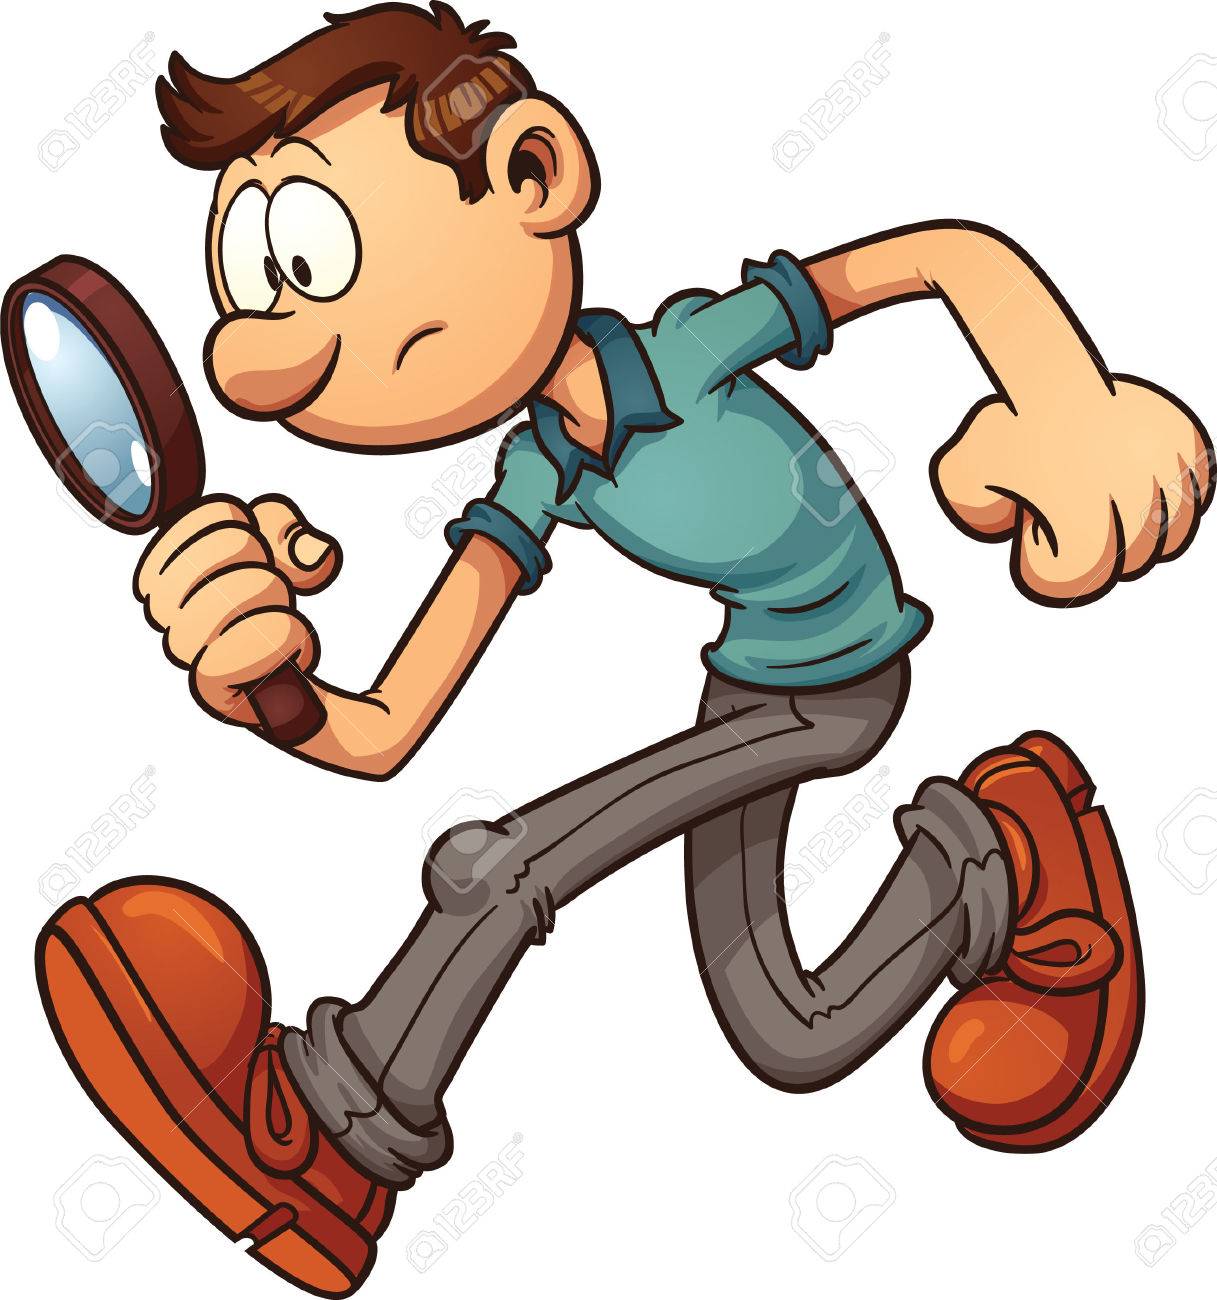 Clipart man with magnifying glass